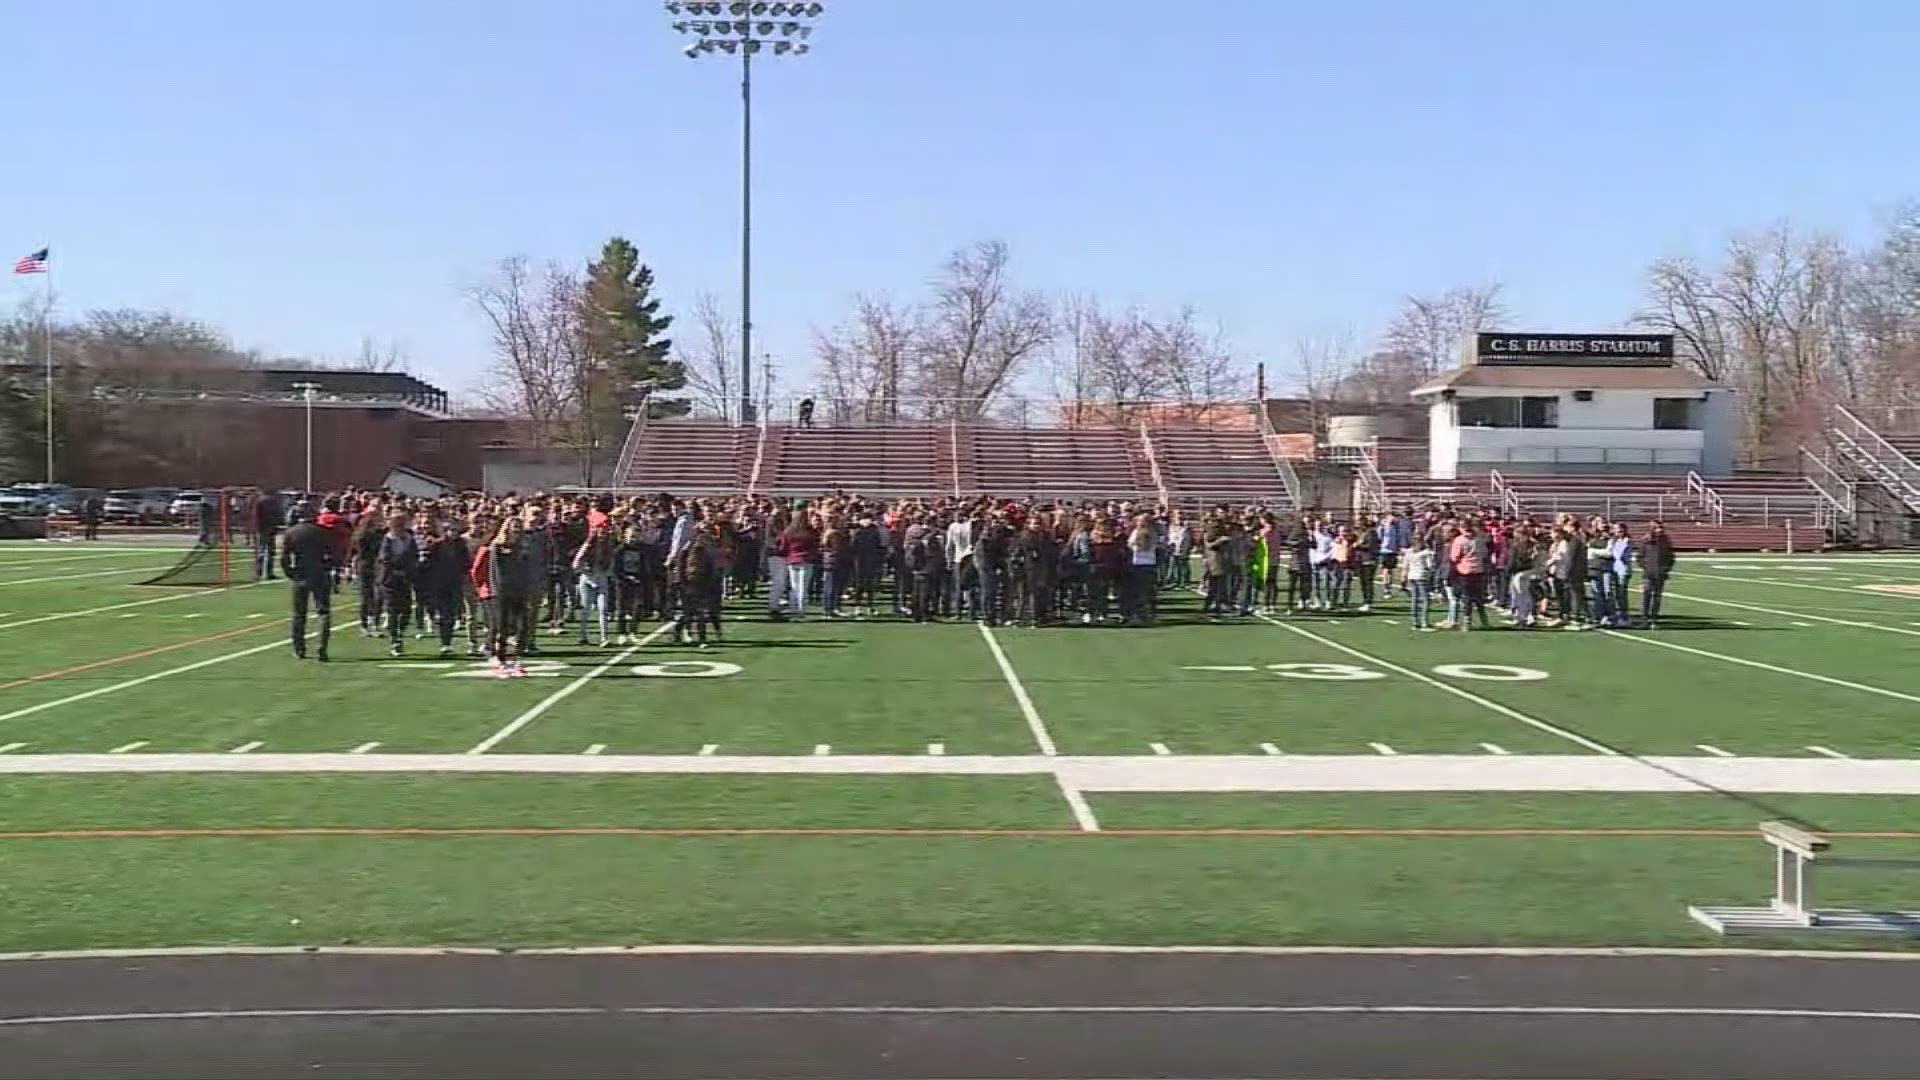 Chagrin Falls High School students participated in the April 20 school walkouts to protest gun violence.